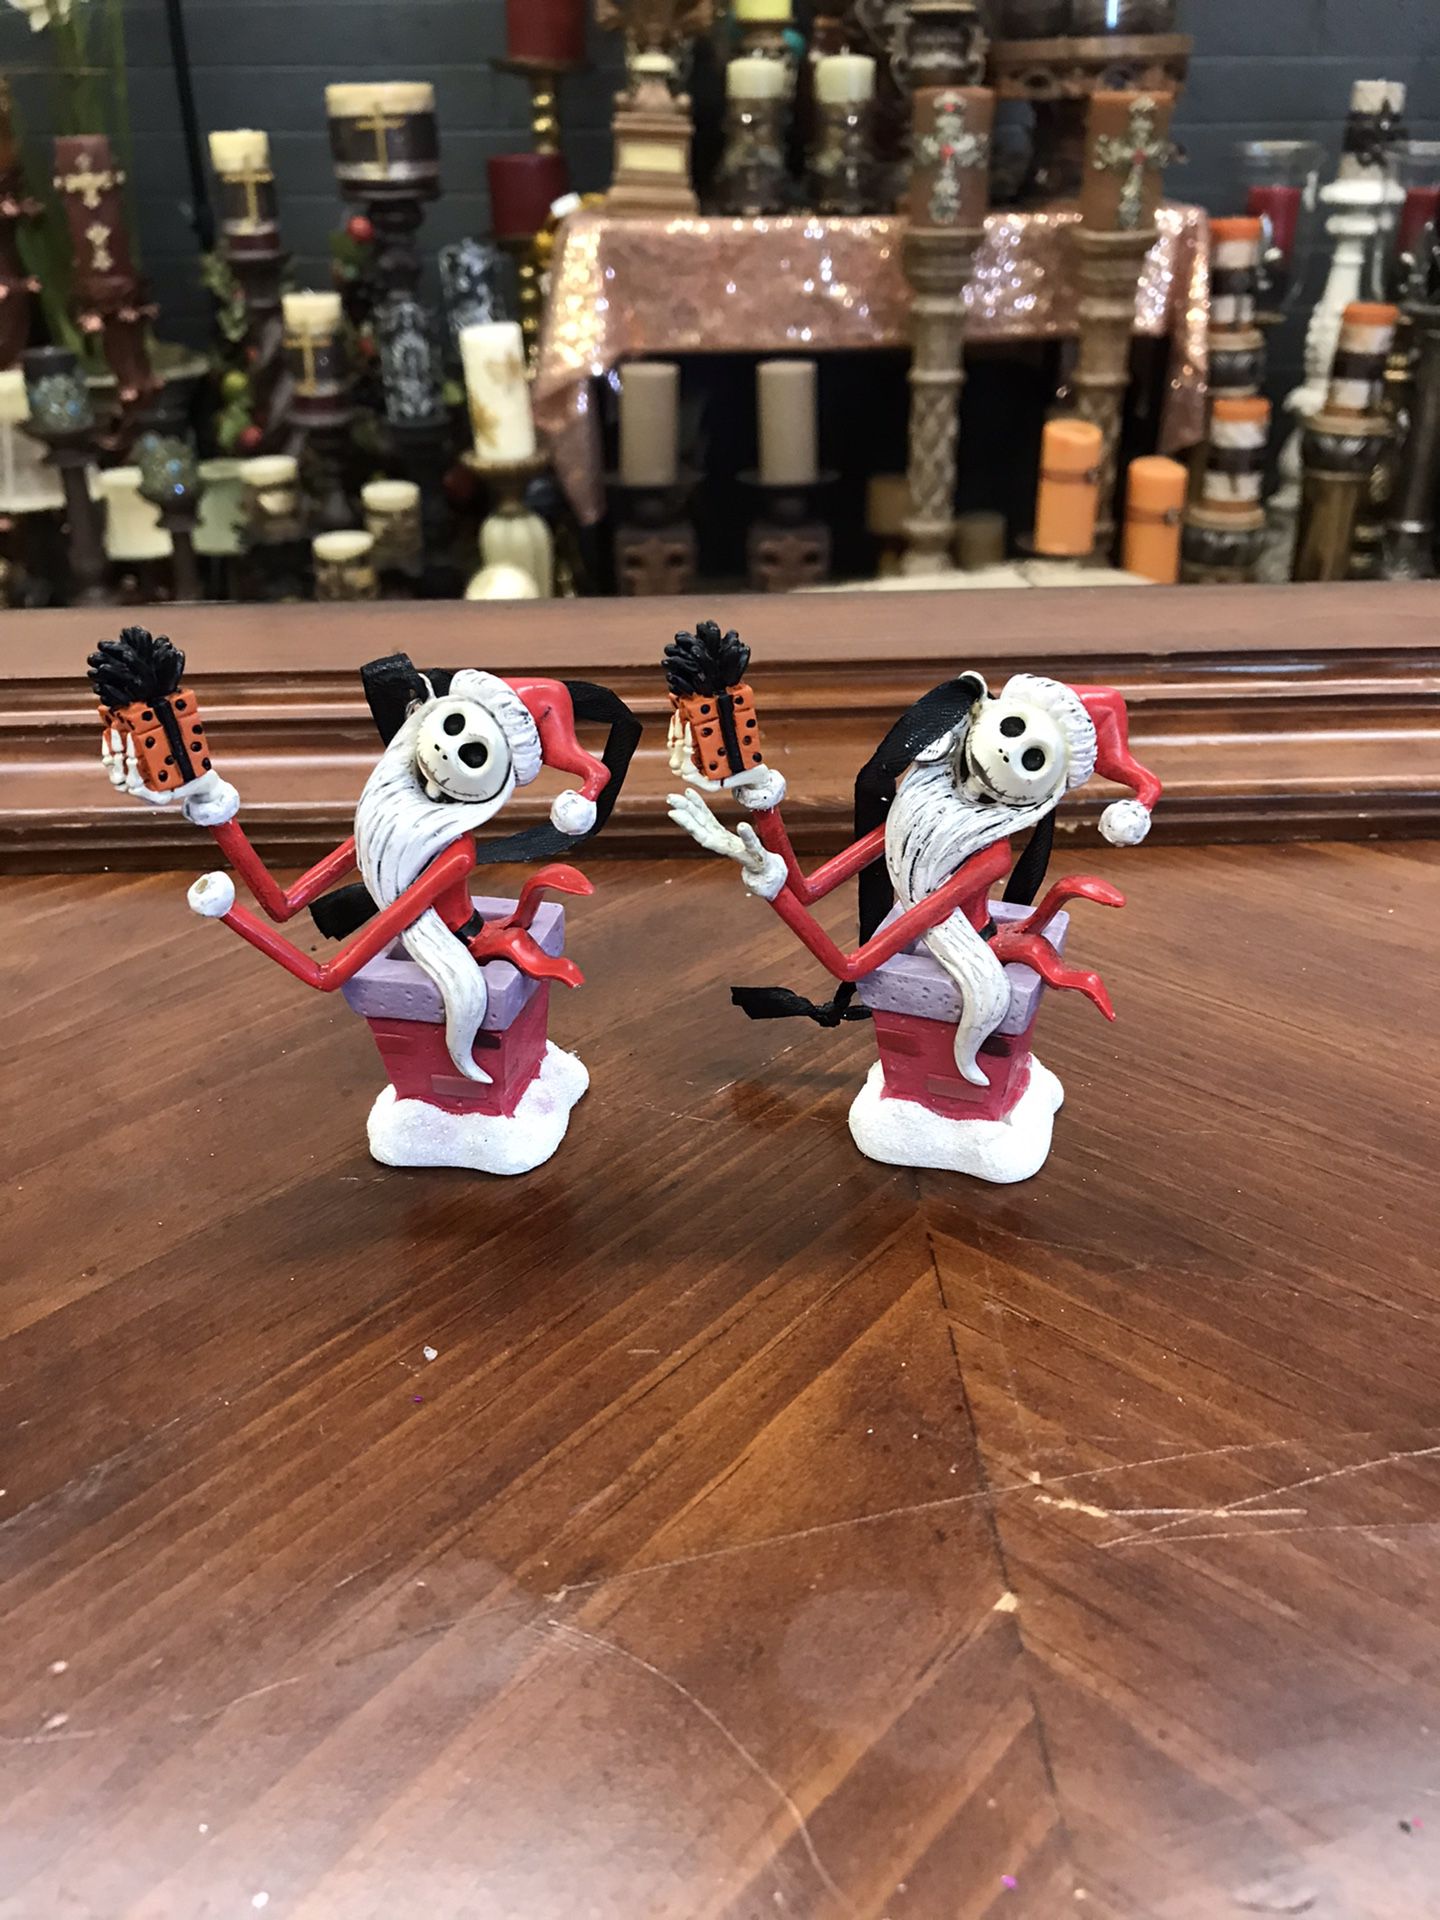 The nightmare before Christmas ornaments